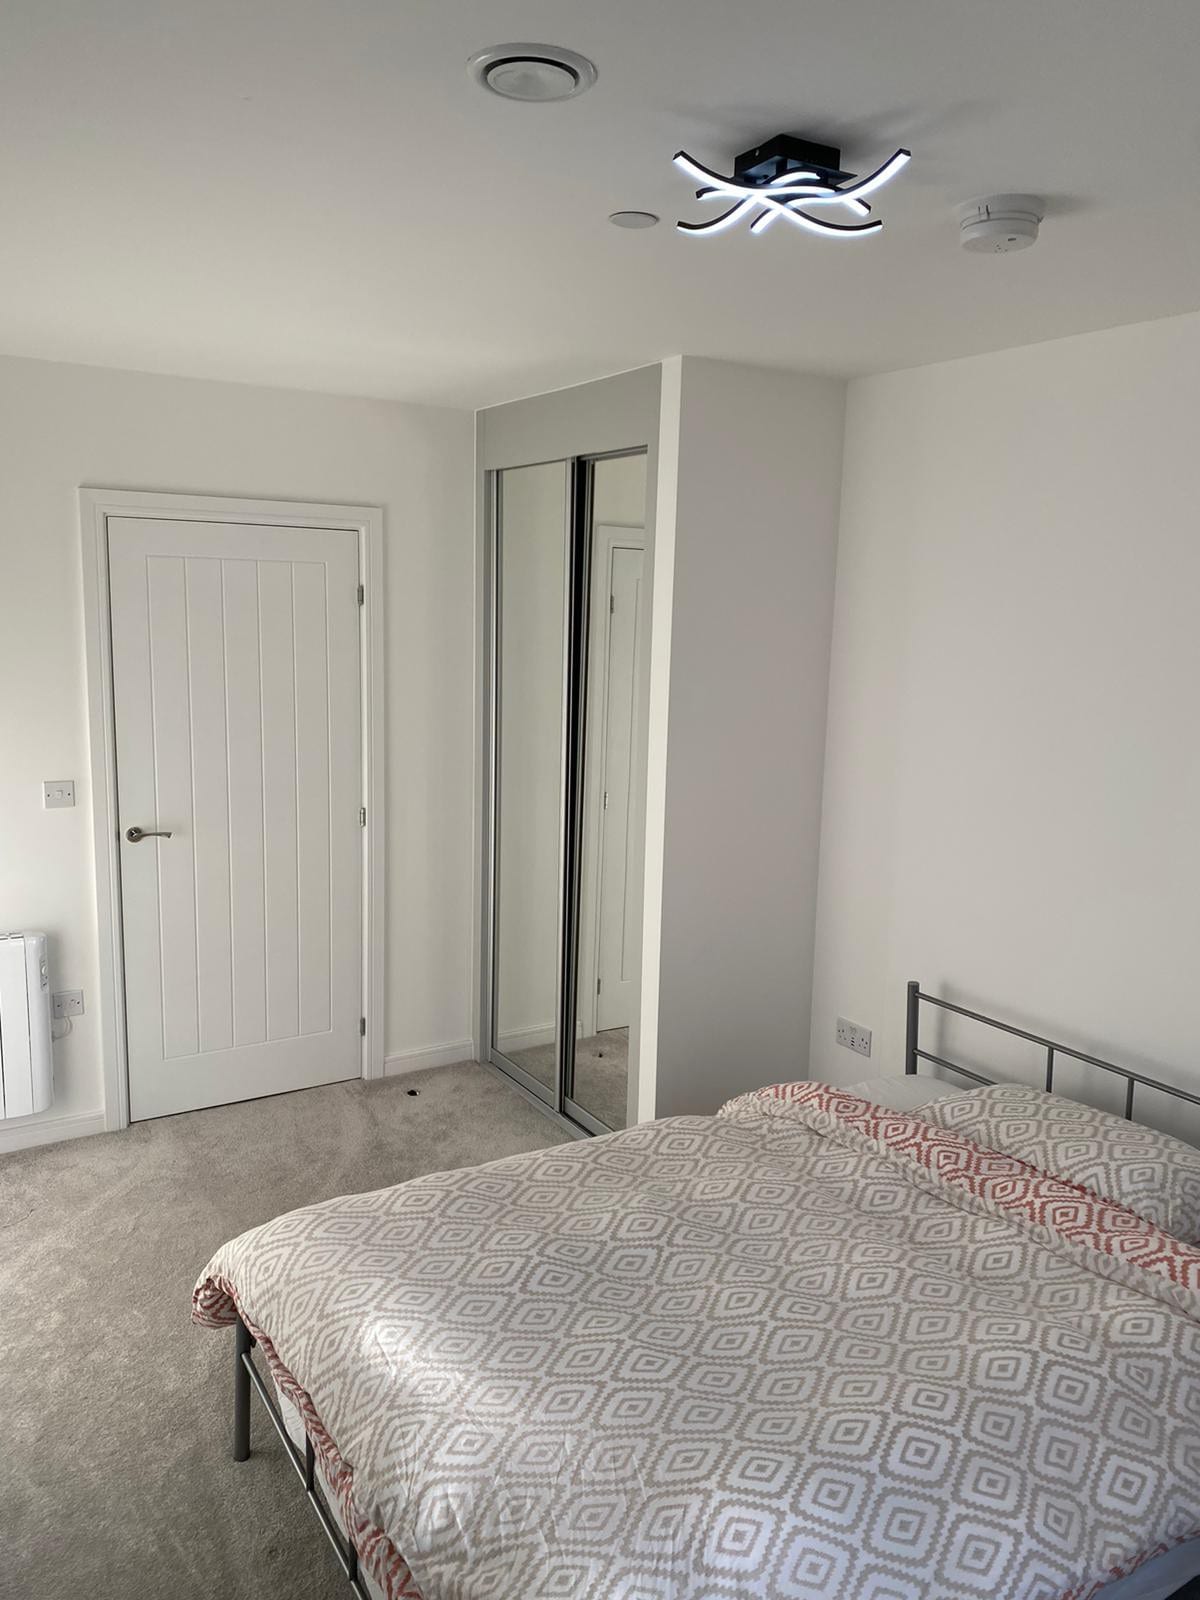 Stansted - private room close to Stansted airport.